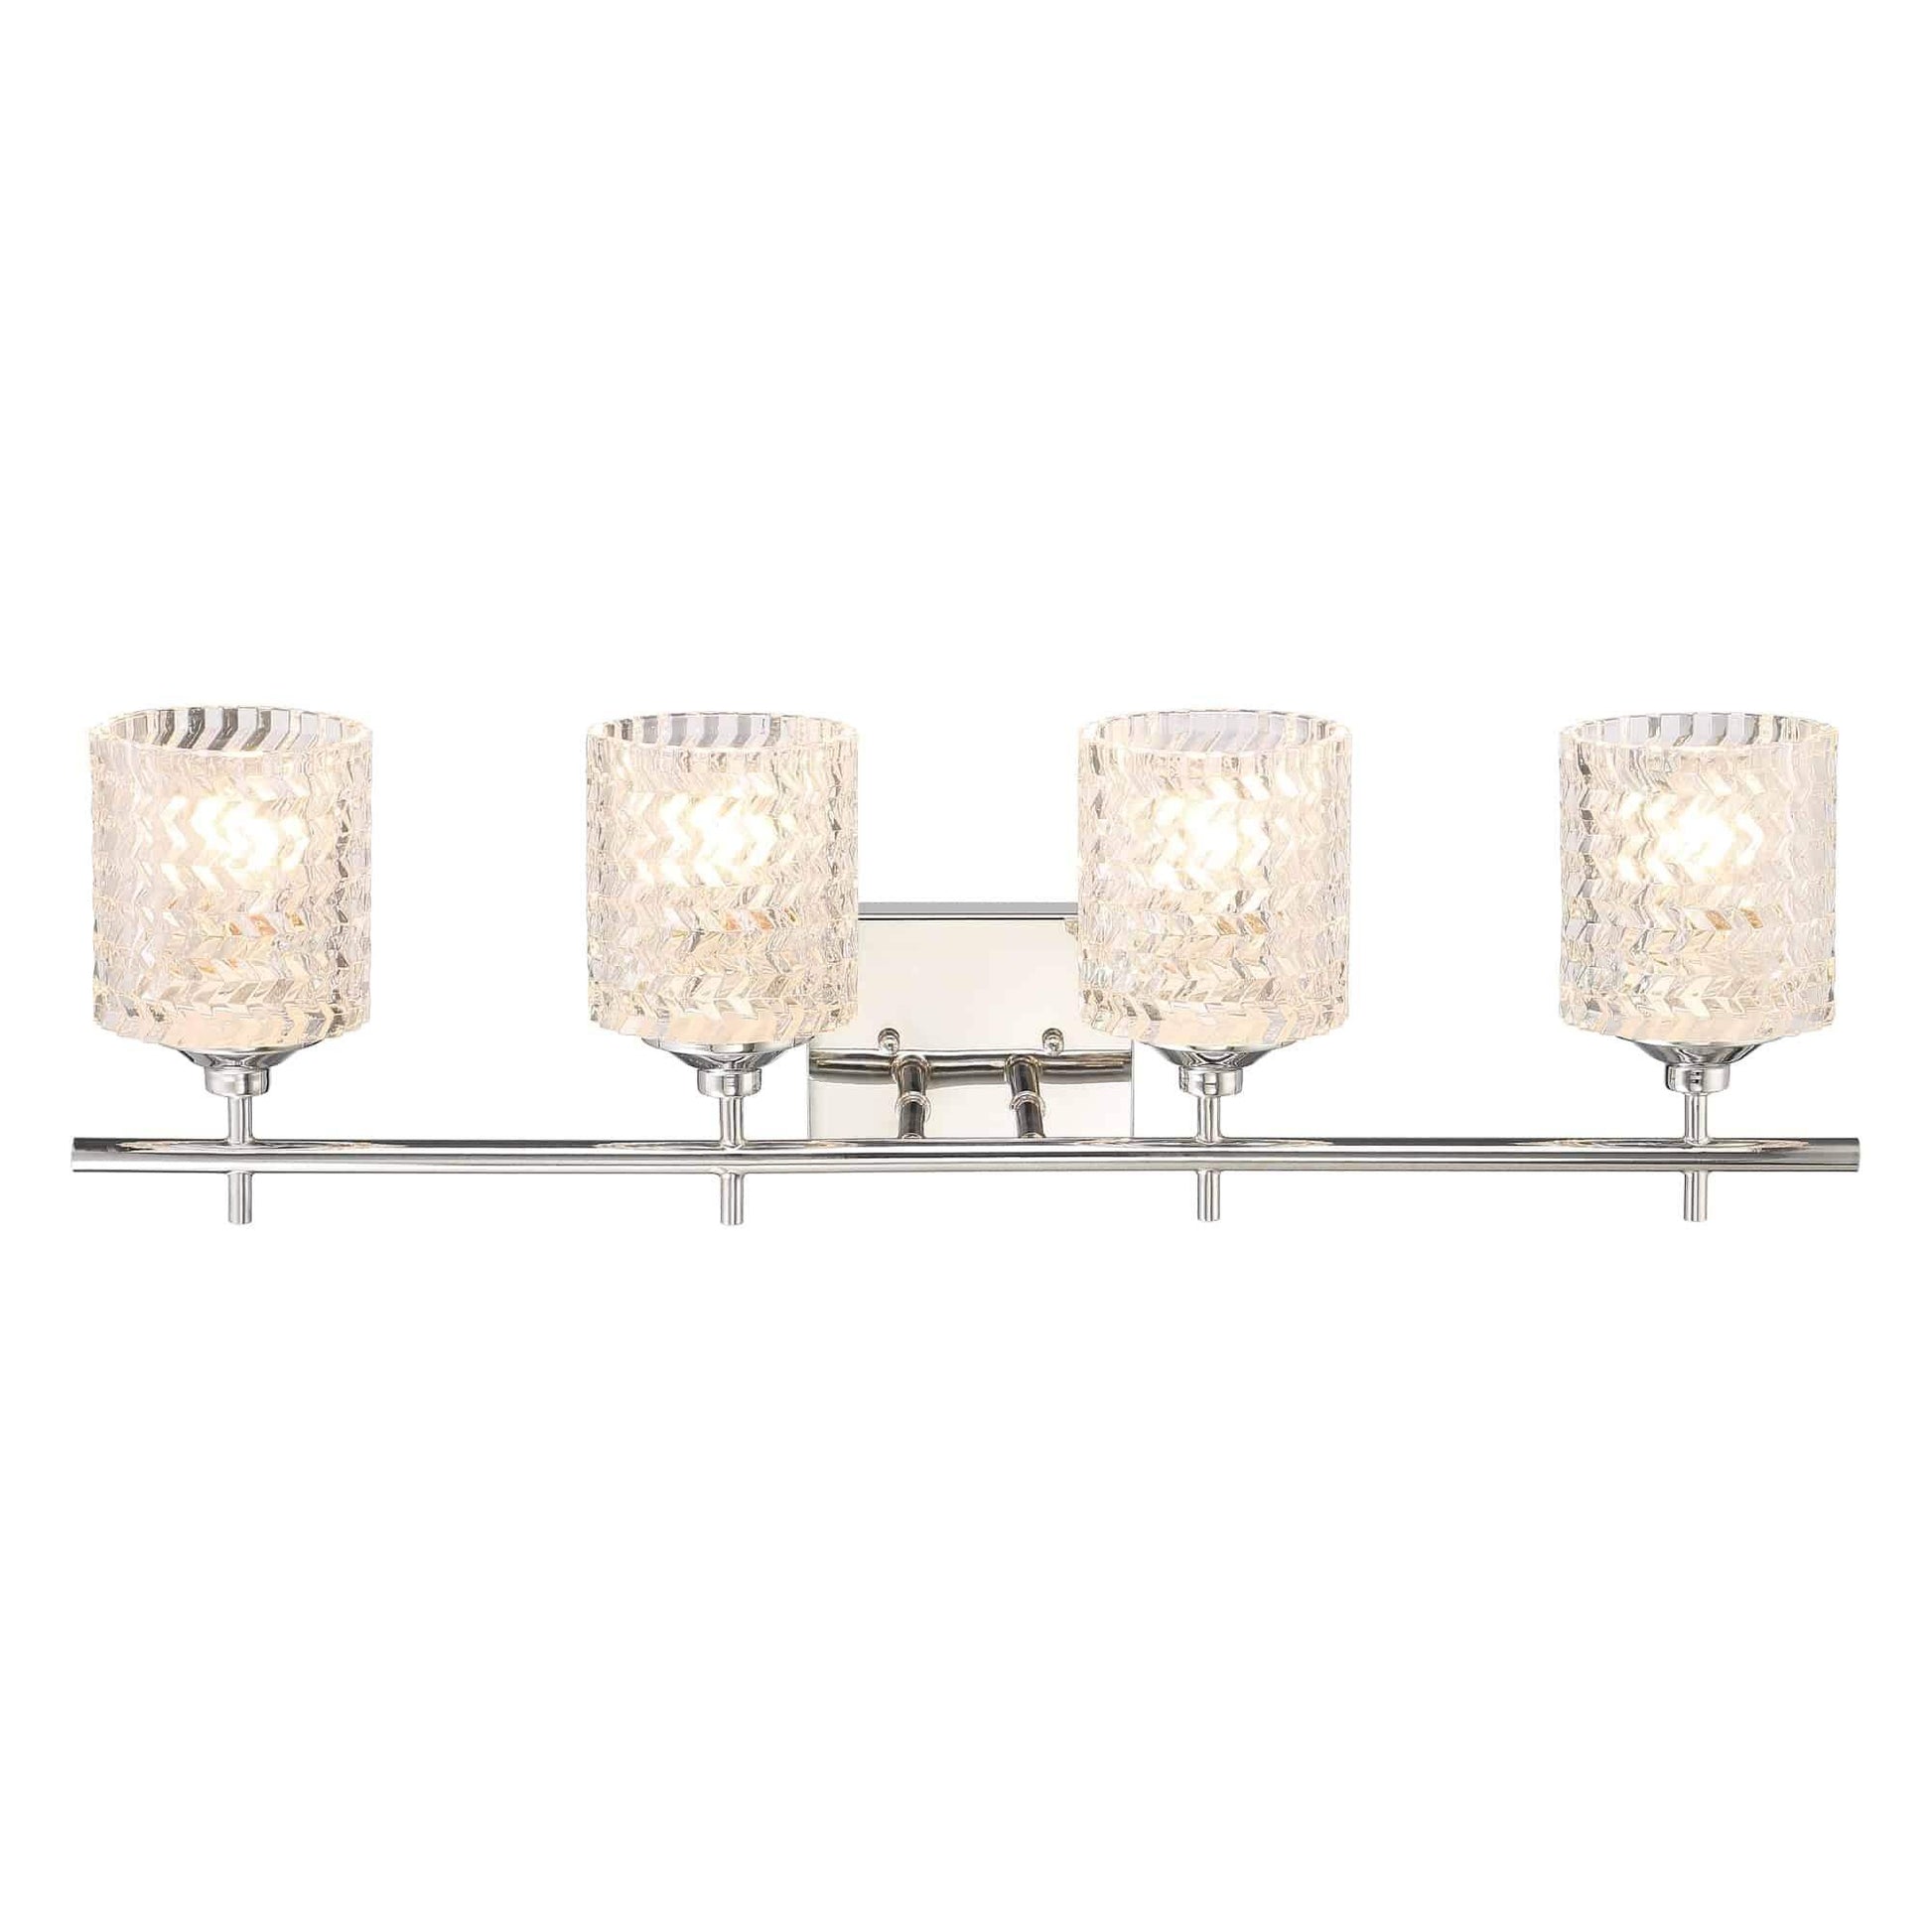 10004 | 4 - Light Dimmable Vanity Light by ACROMA™  UL - ACROMA